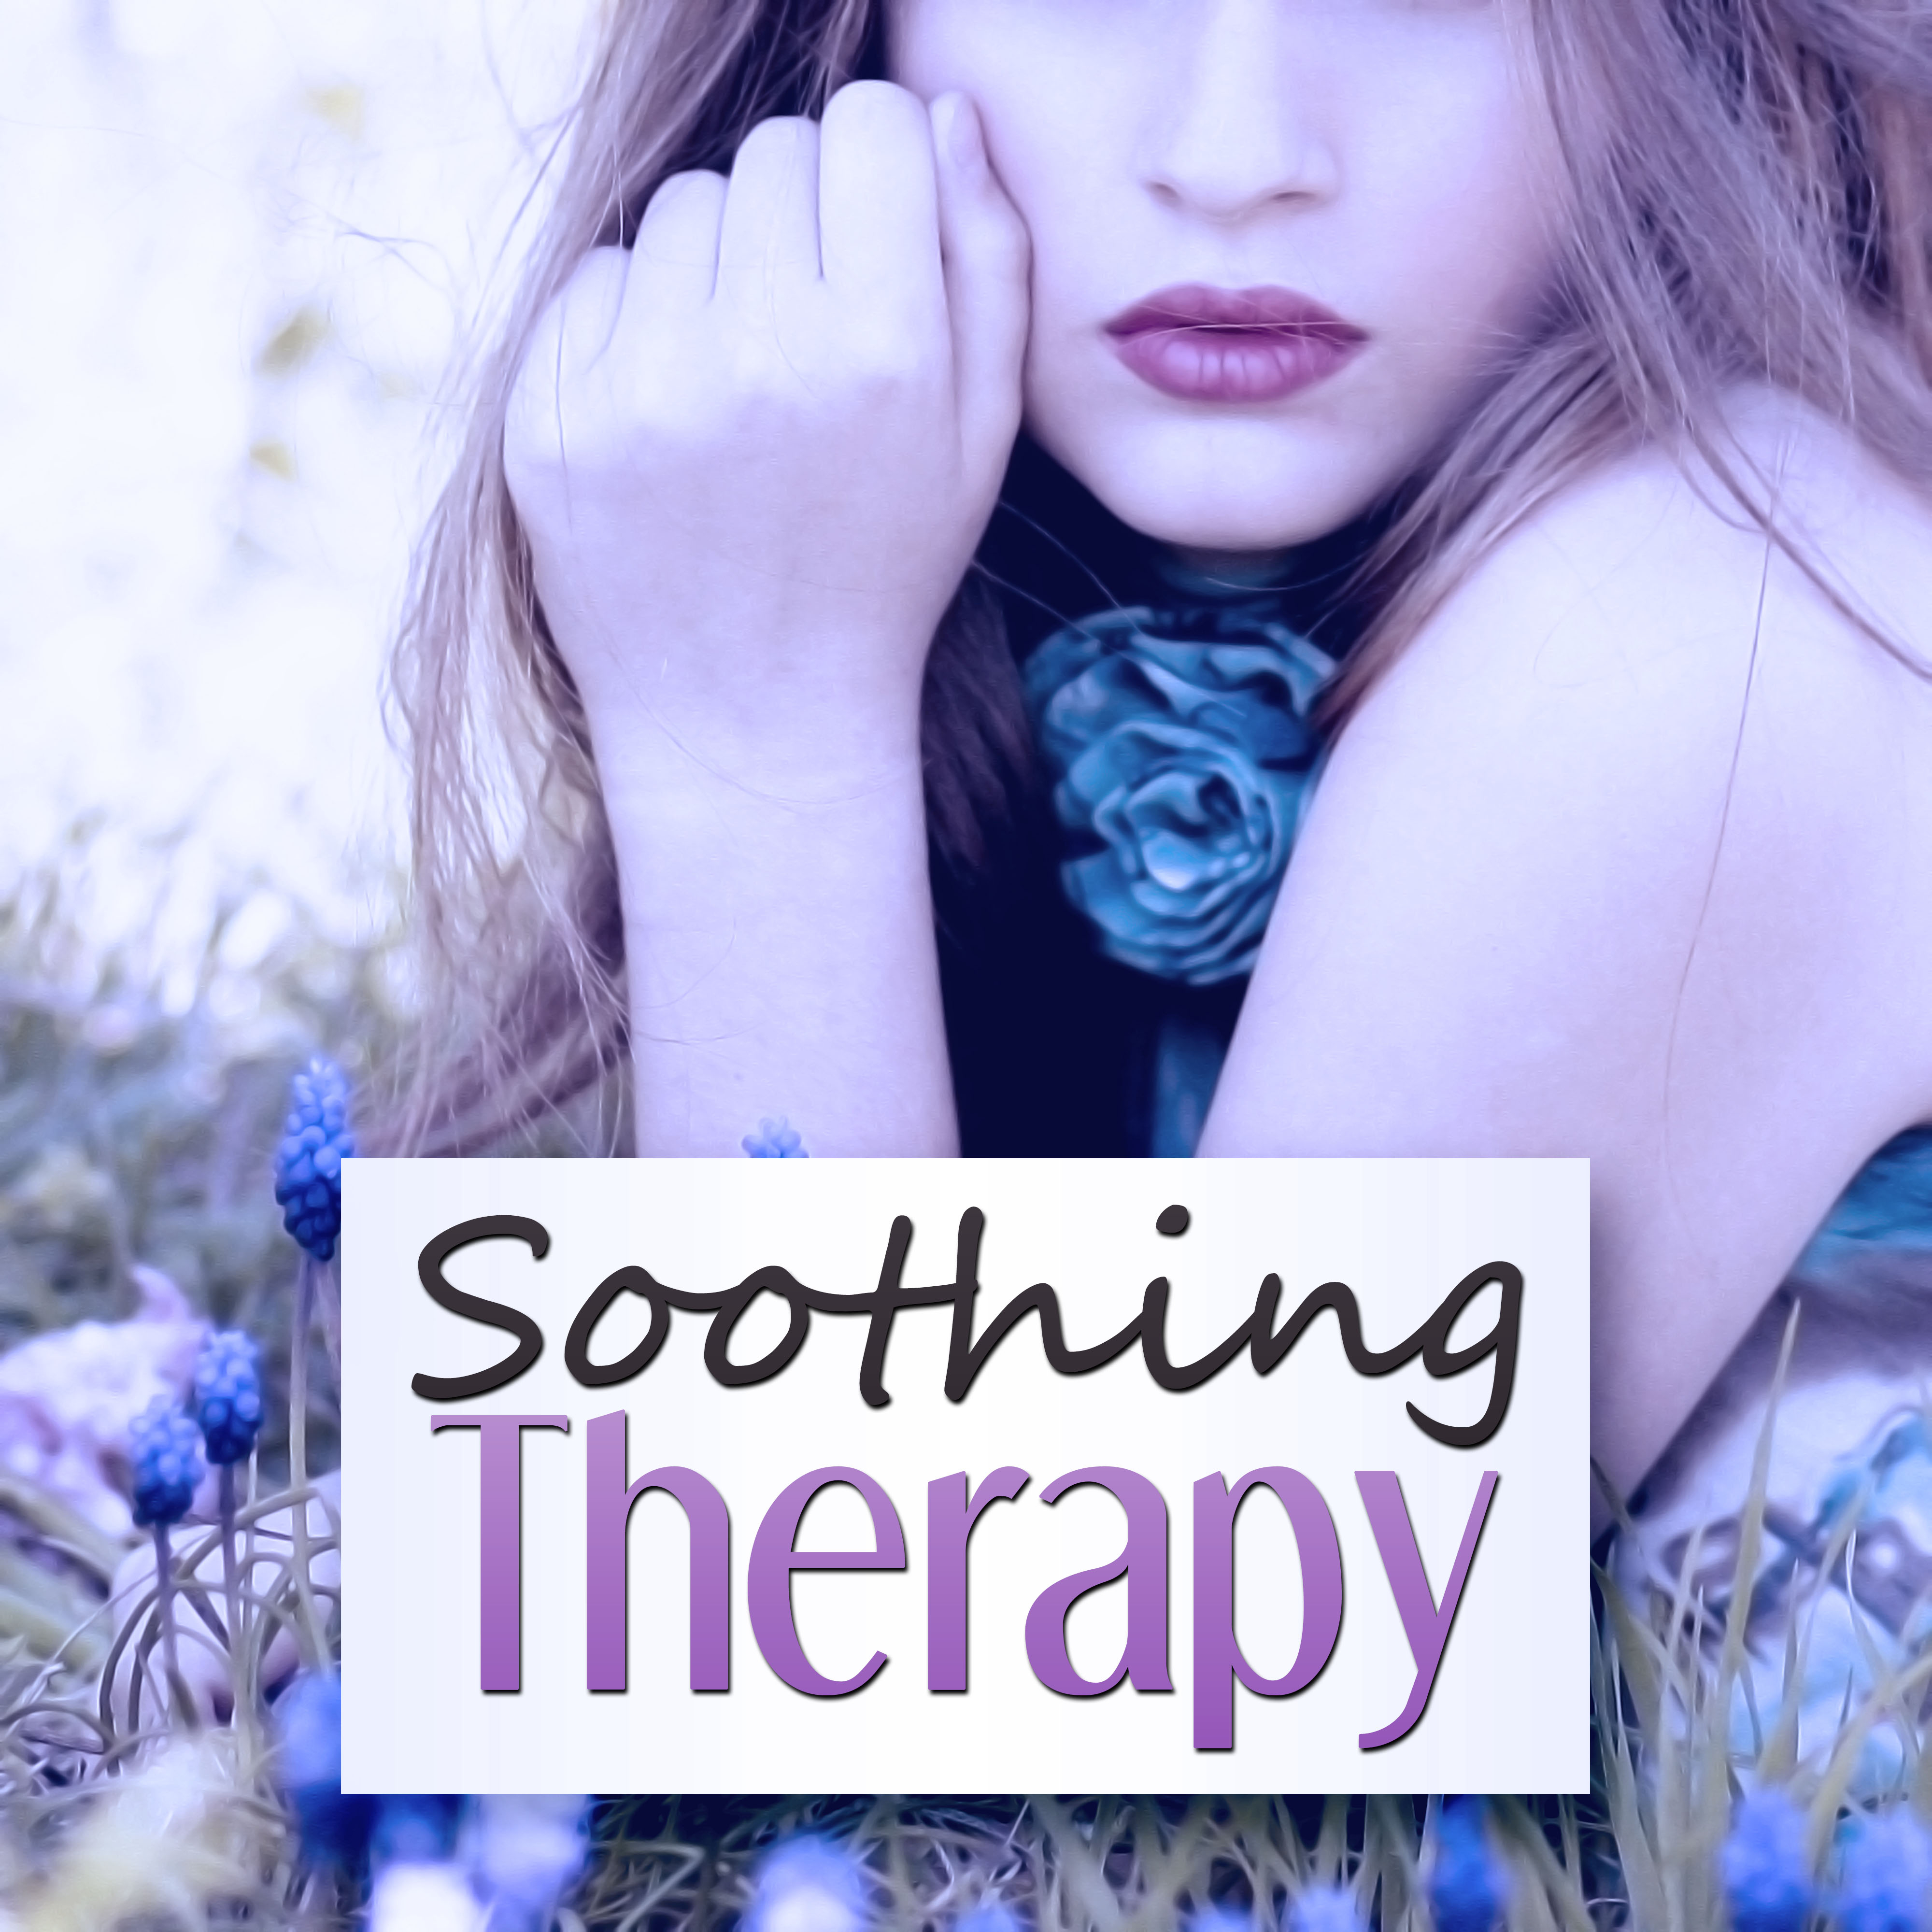 Soothing Therapy  Therapy Sounds, Sea Waves, Body Massage, Wellness, Peaceful Music